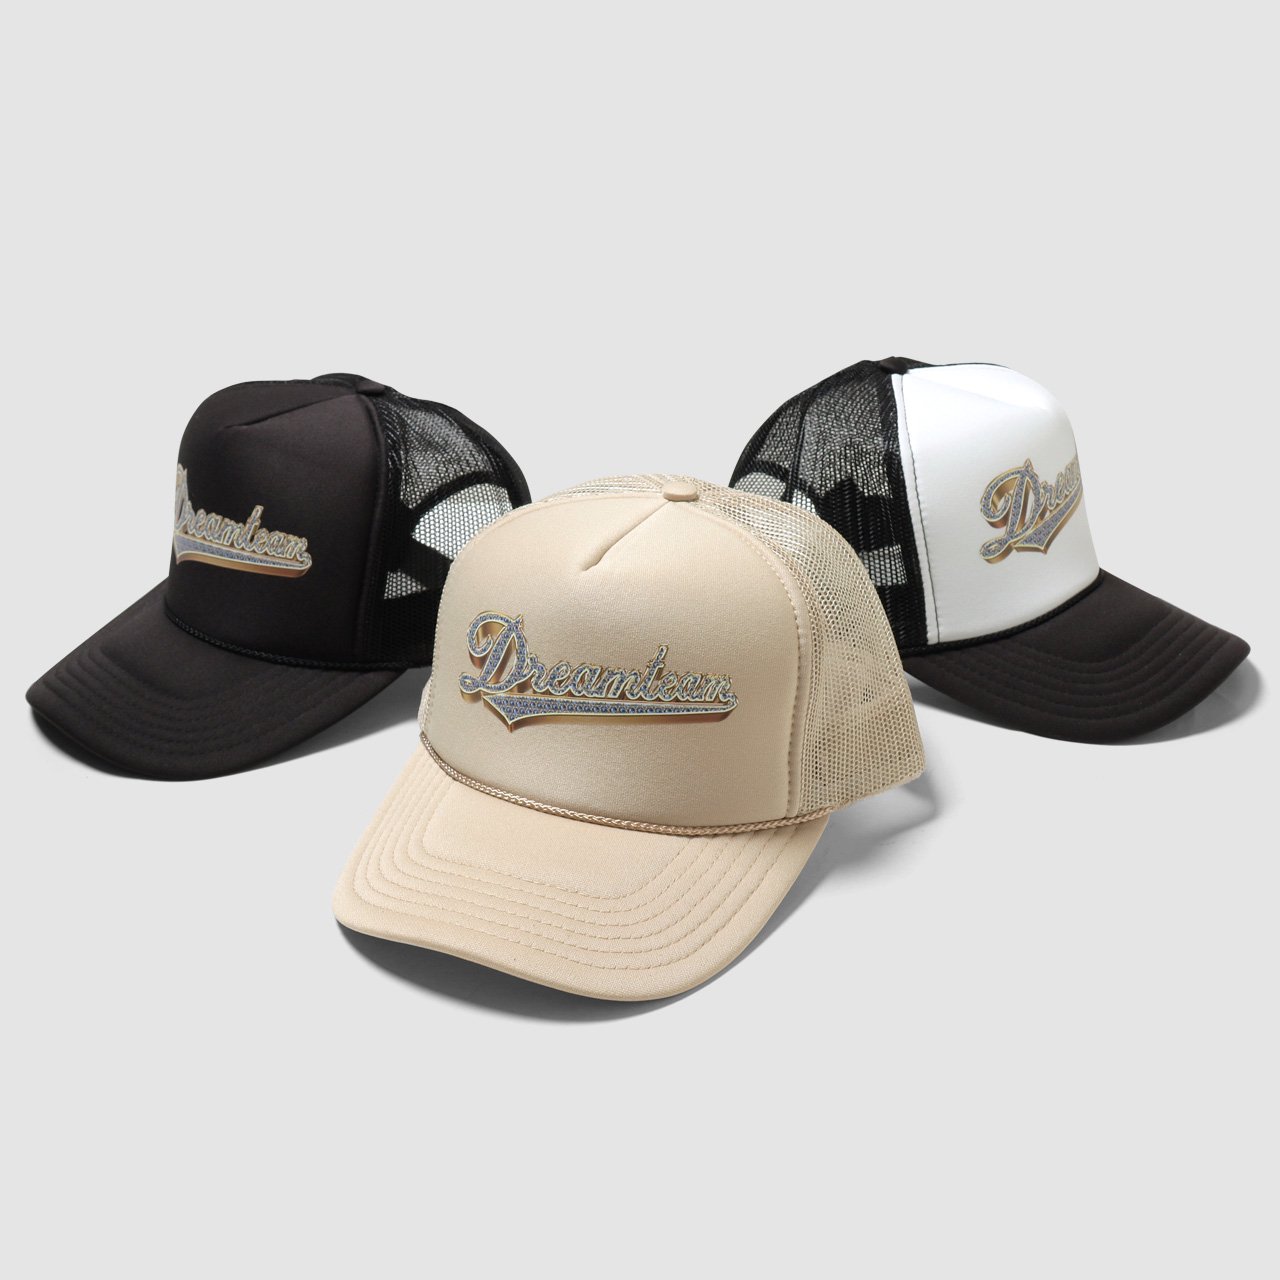 <img class='new_mark_img1' src='https://img.shop-pro.jp/img/new/icons20.gif' style='border:none;display:inline;margin:0px;padding:0px;width:auto;' />Dreamteam Bling Logo Mesh Cap